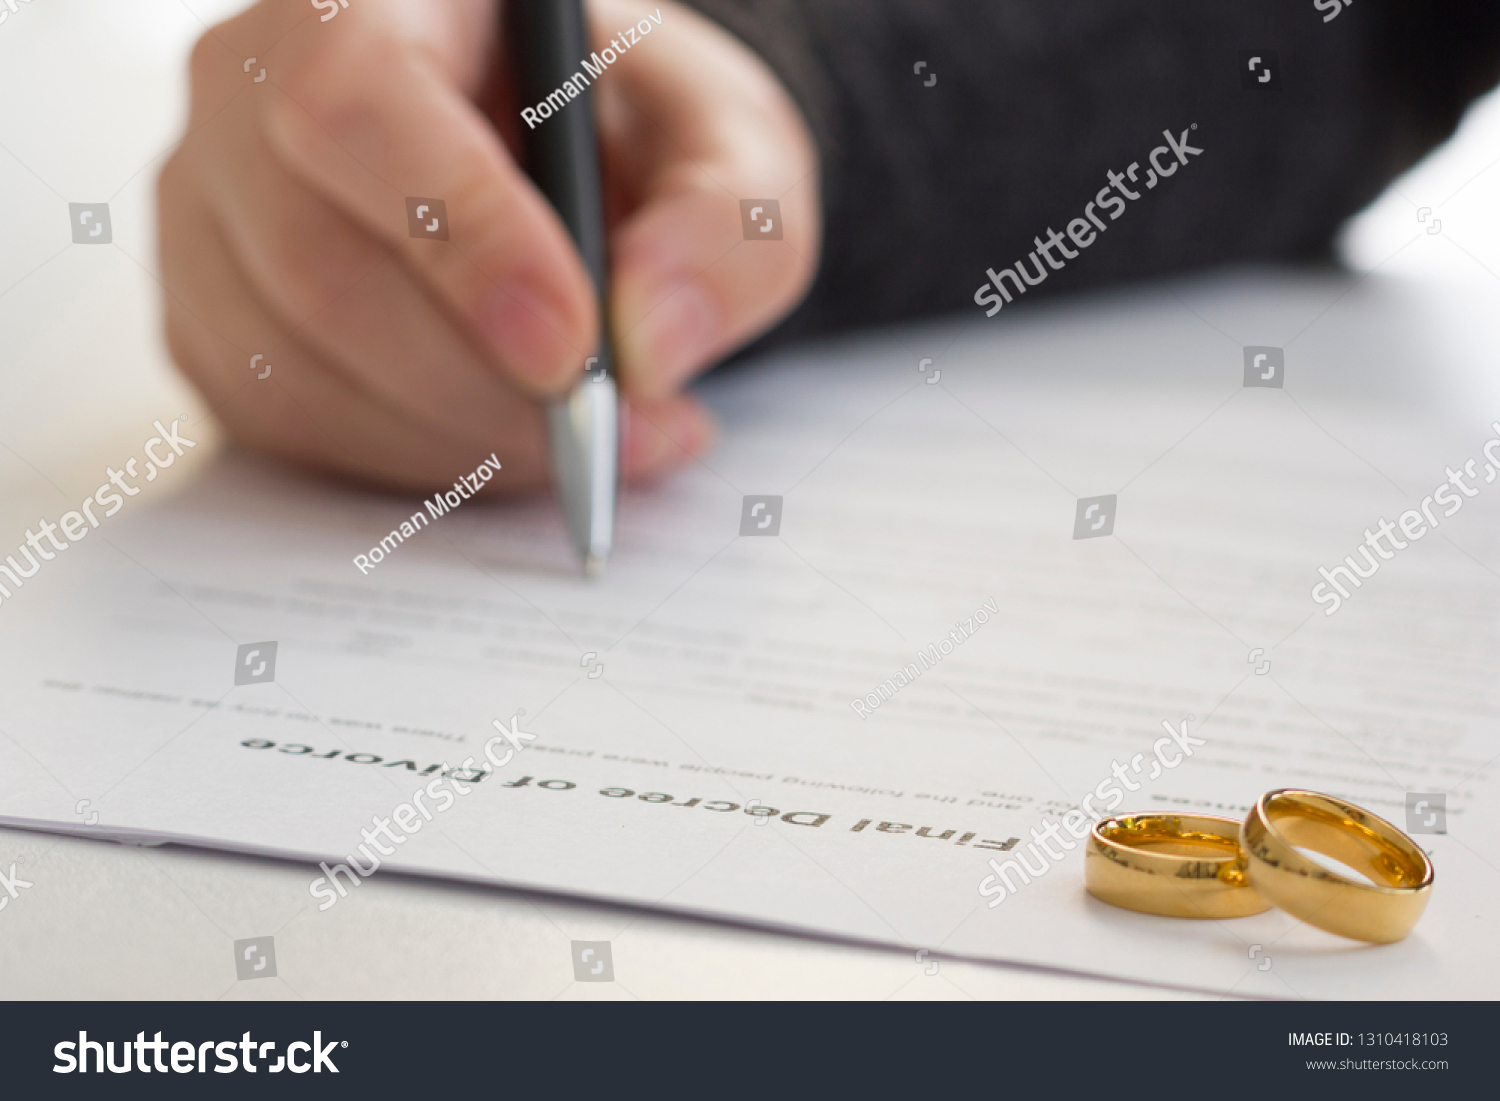 Hands of wife, husband signing decree of divorce, dissolution, canceling marriage, legal separation documents, filing divorce papers or premarital agreement prepared by lawyer. Wedding ring #1310418103